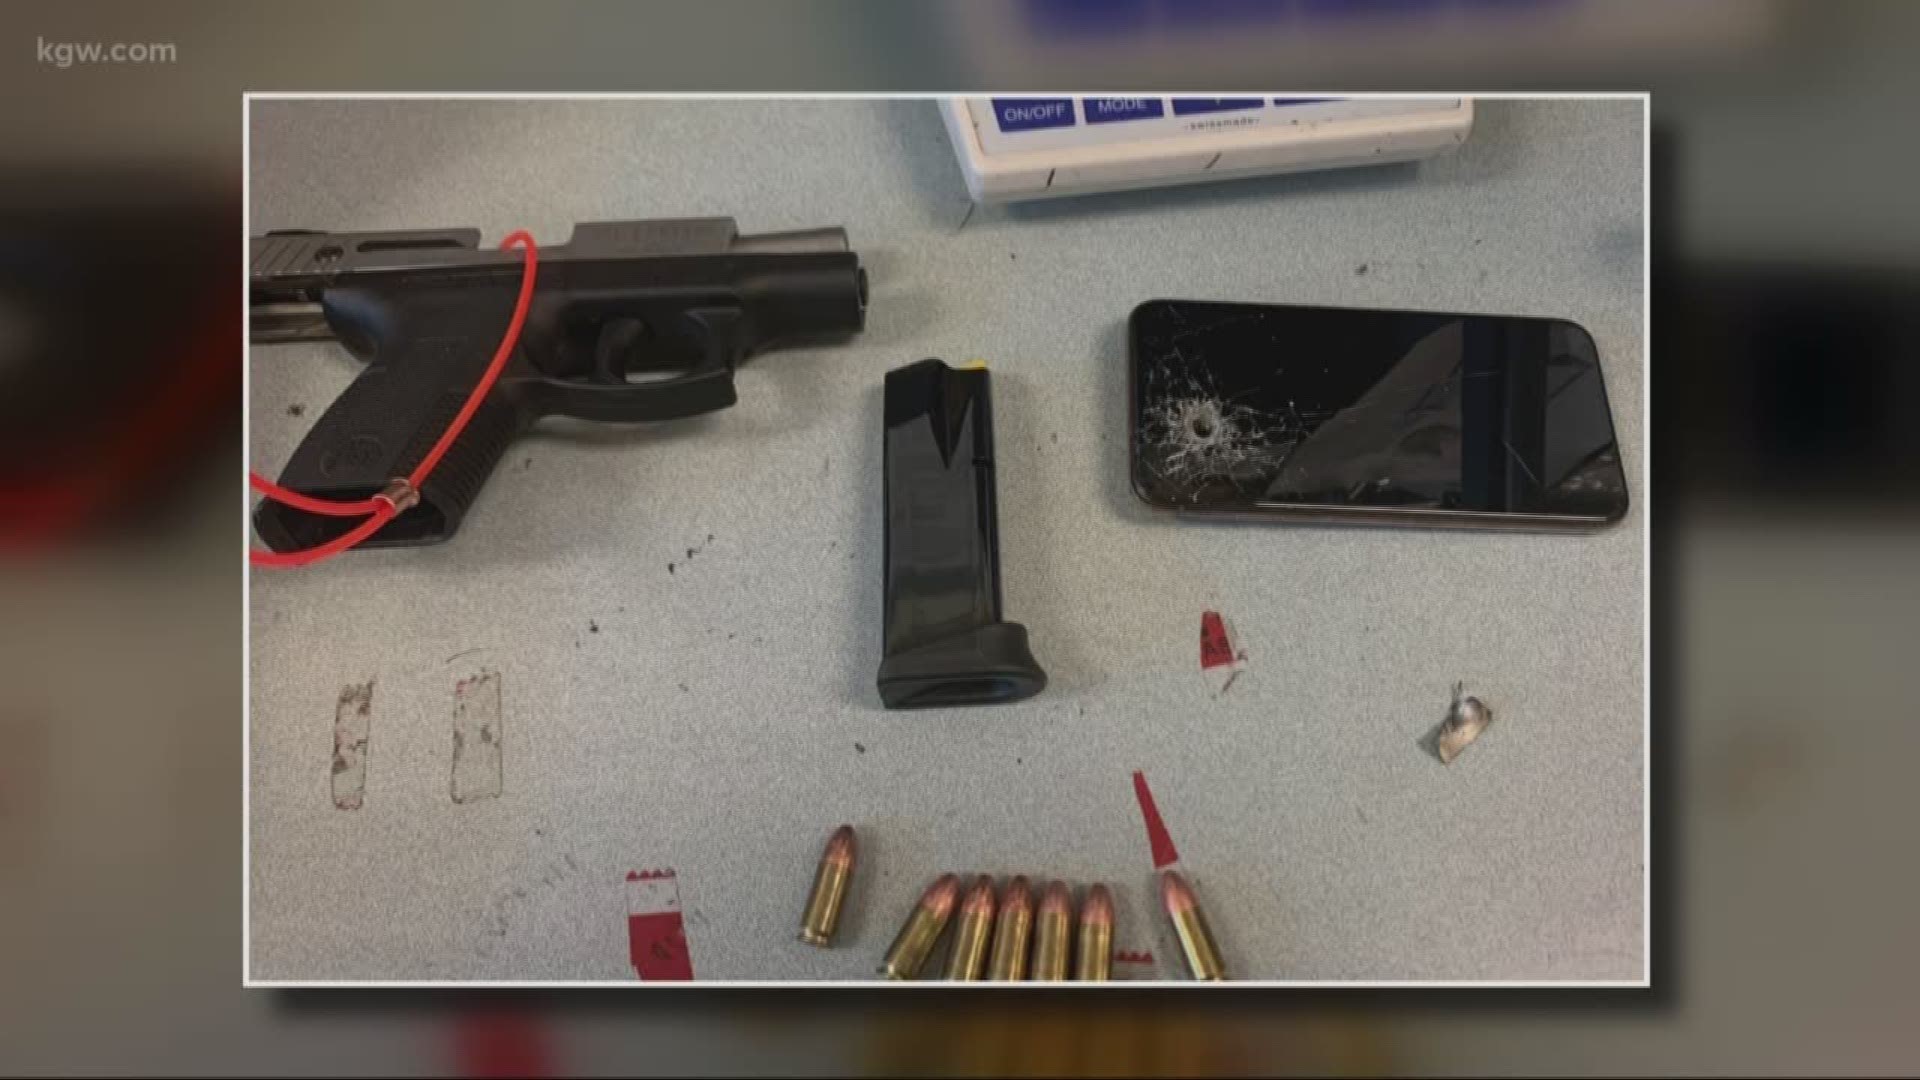 A woman fired a gun during a New Year's celebration inside a condo in North Bethany, and the bullet went through her cell phone and her neighbor's wall.